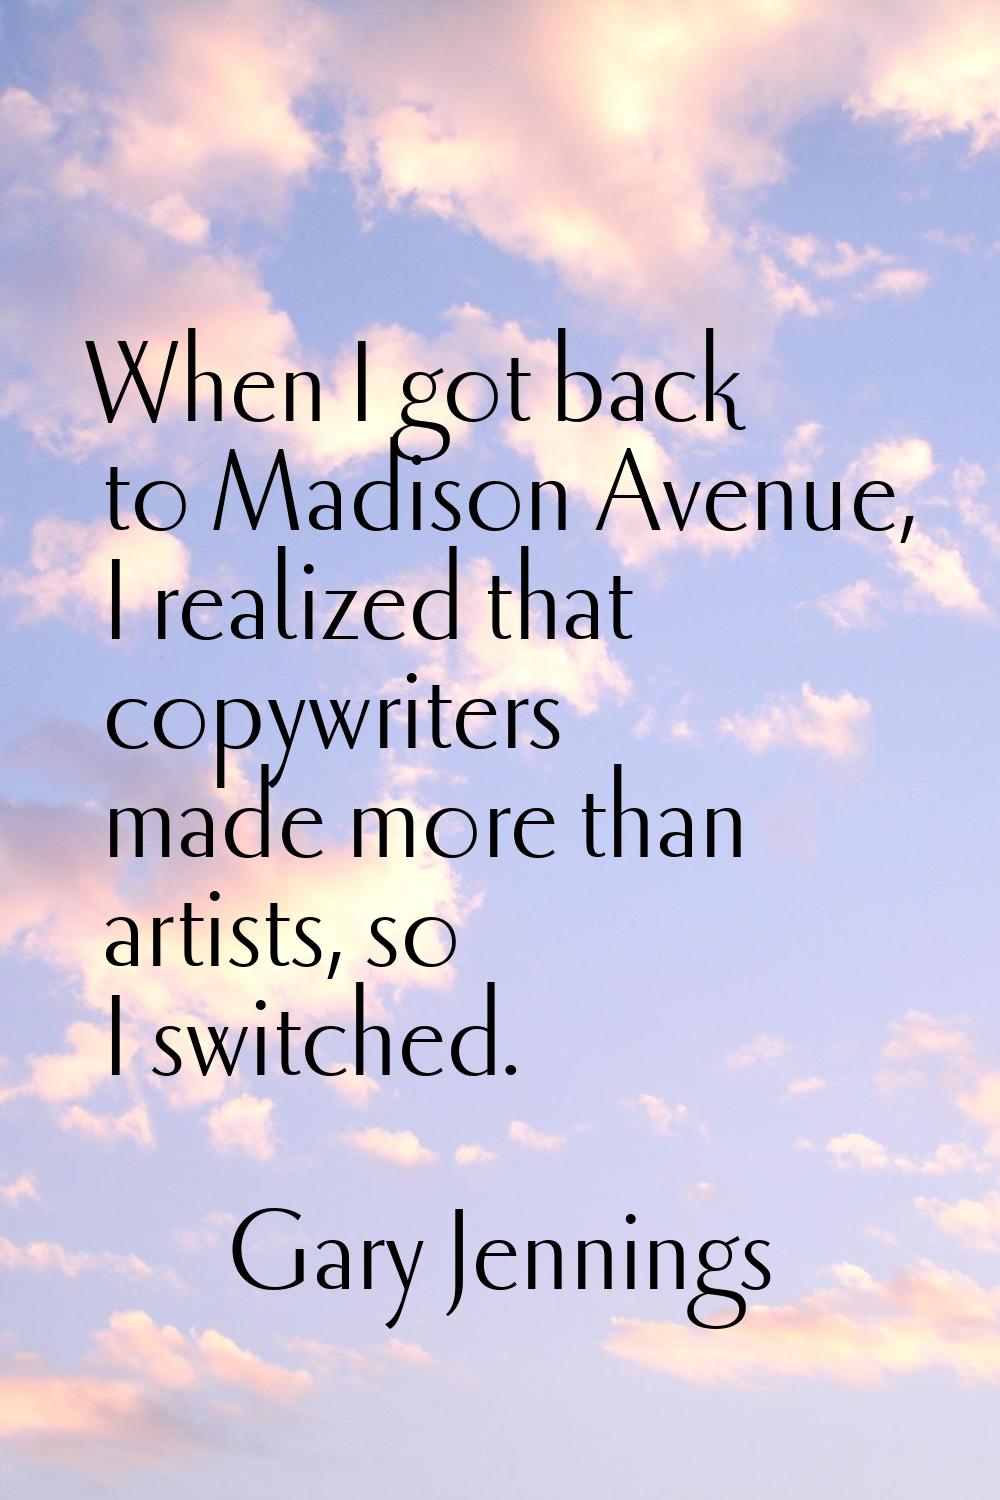 When I got back to Madison Avenue, I realized that copywriters made more than artists, so I switche